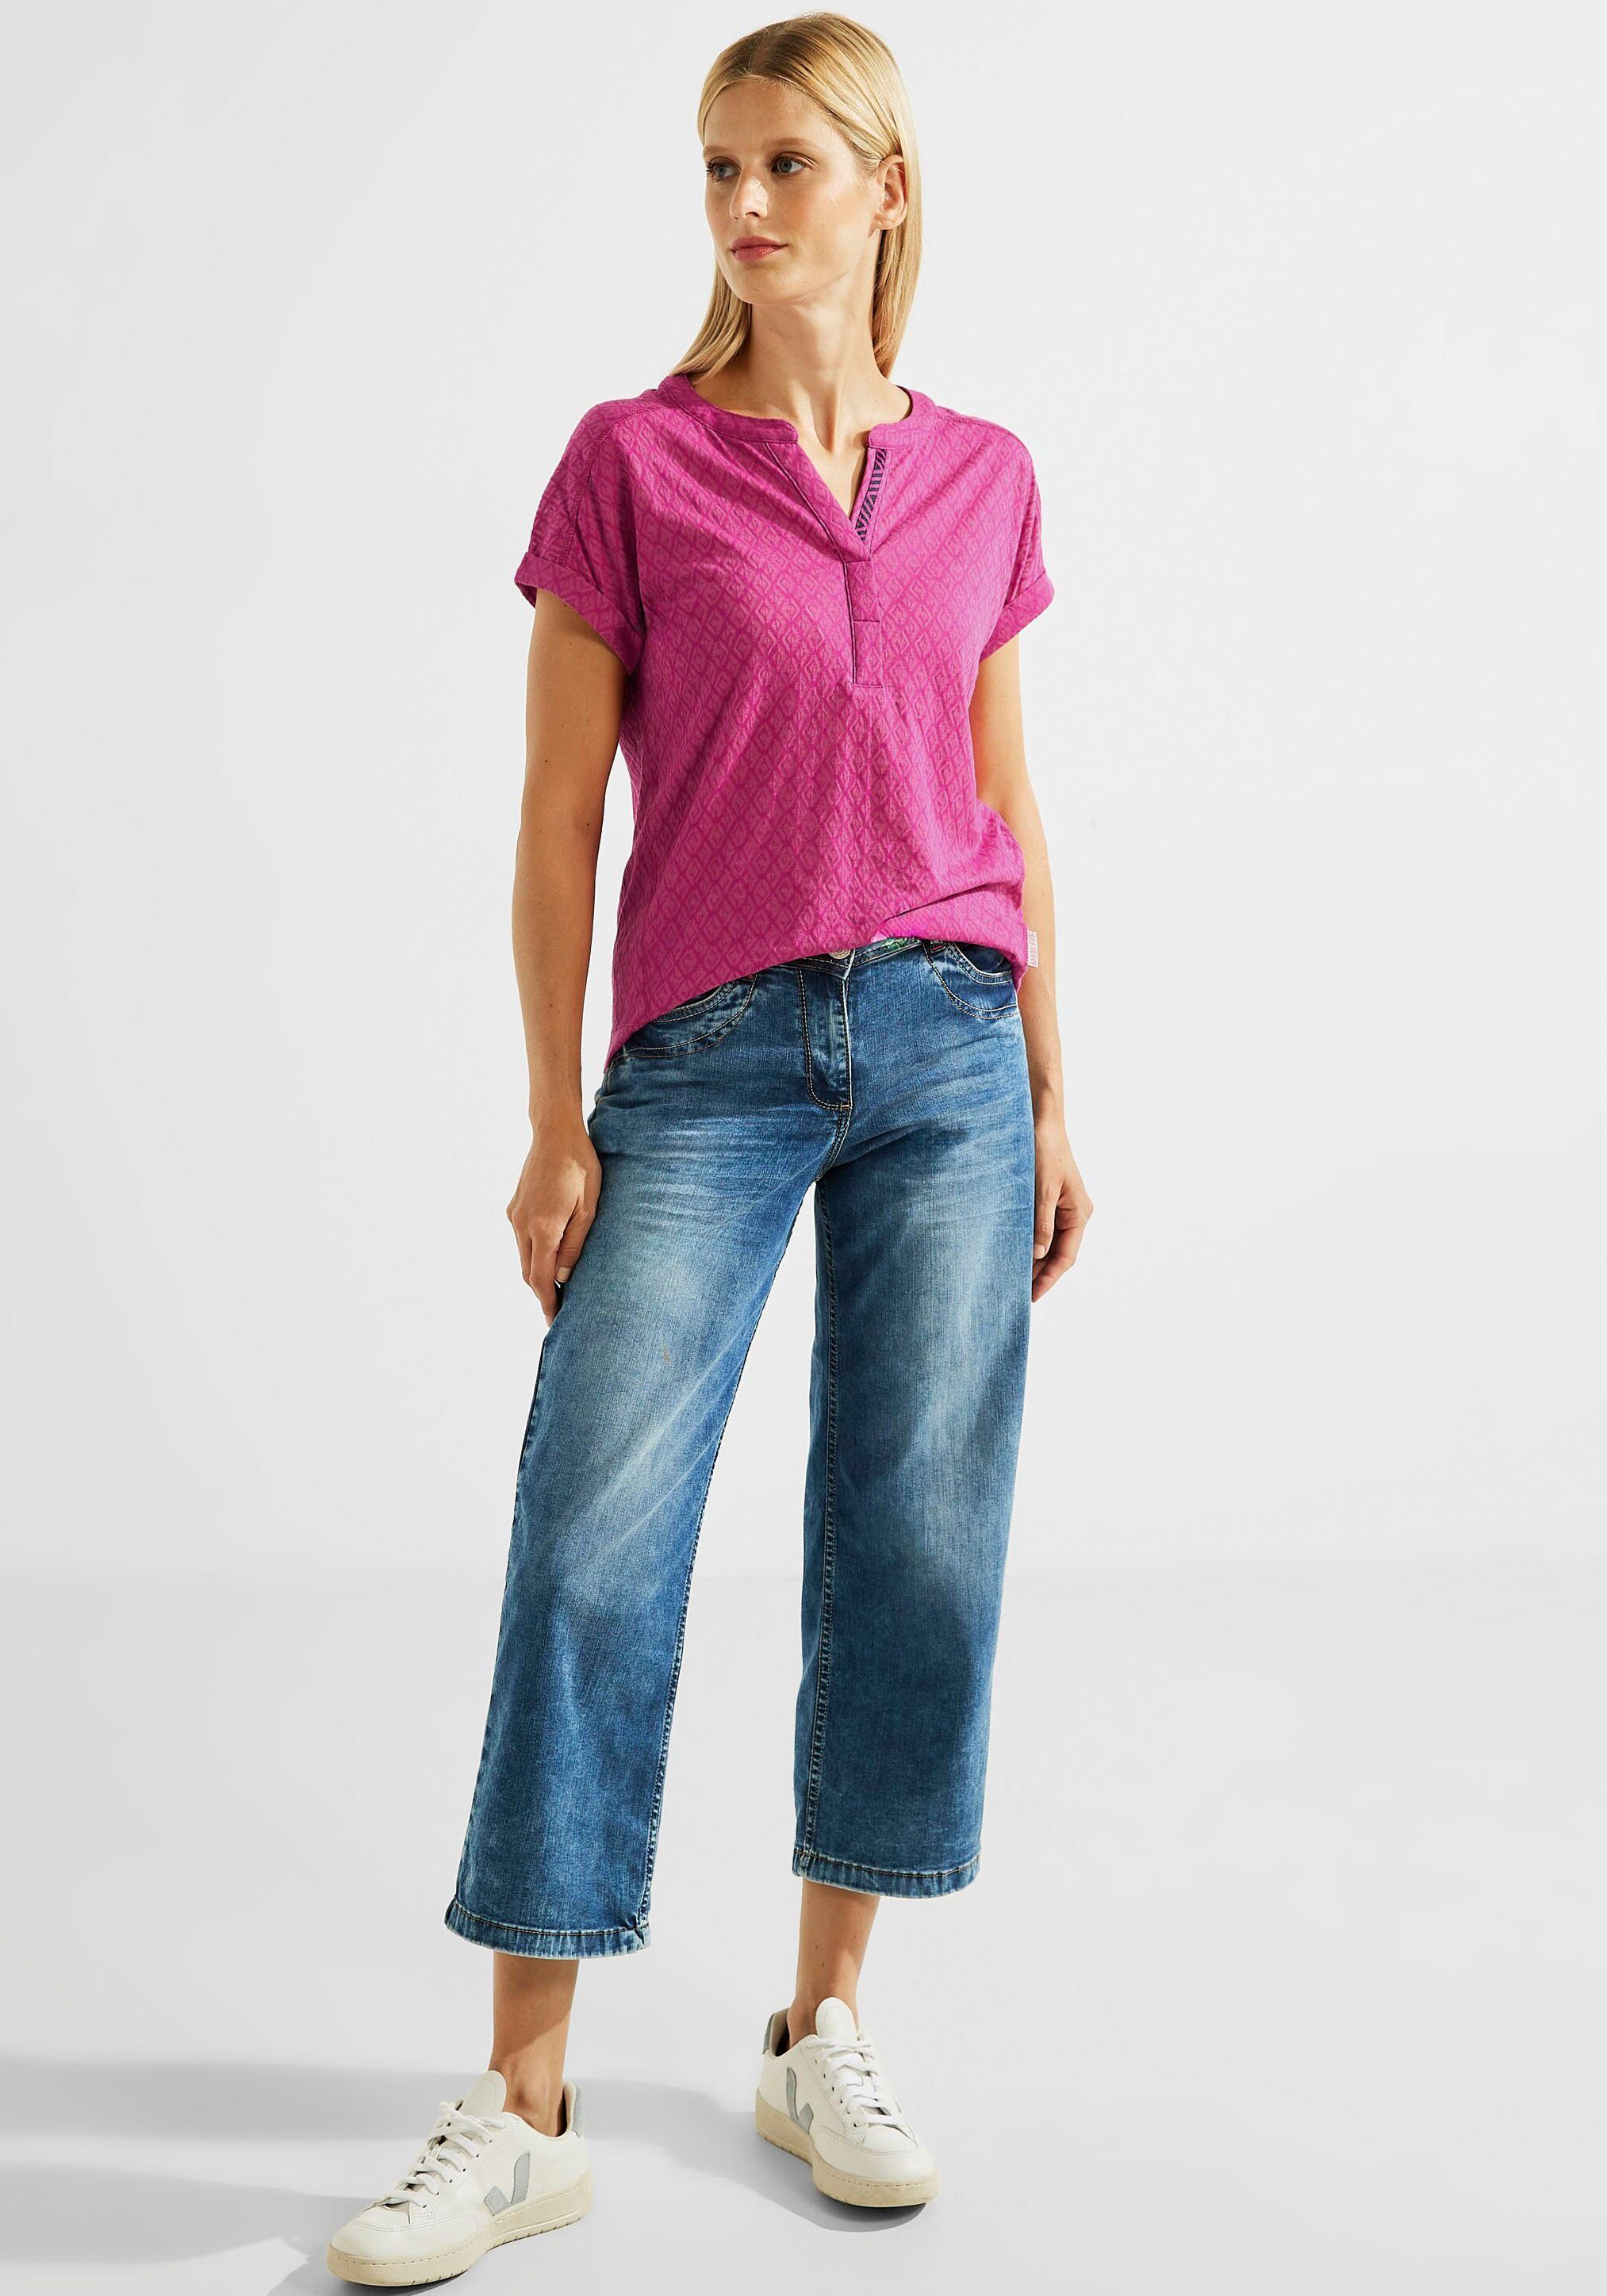 pink in T-Shirt cool Allover-Muster Cecil mit Rhombusform